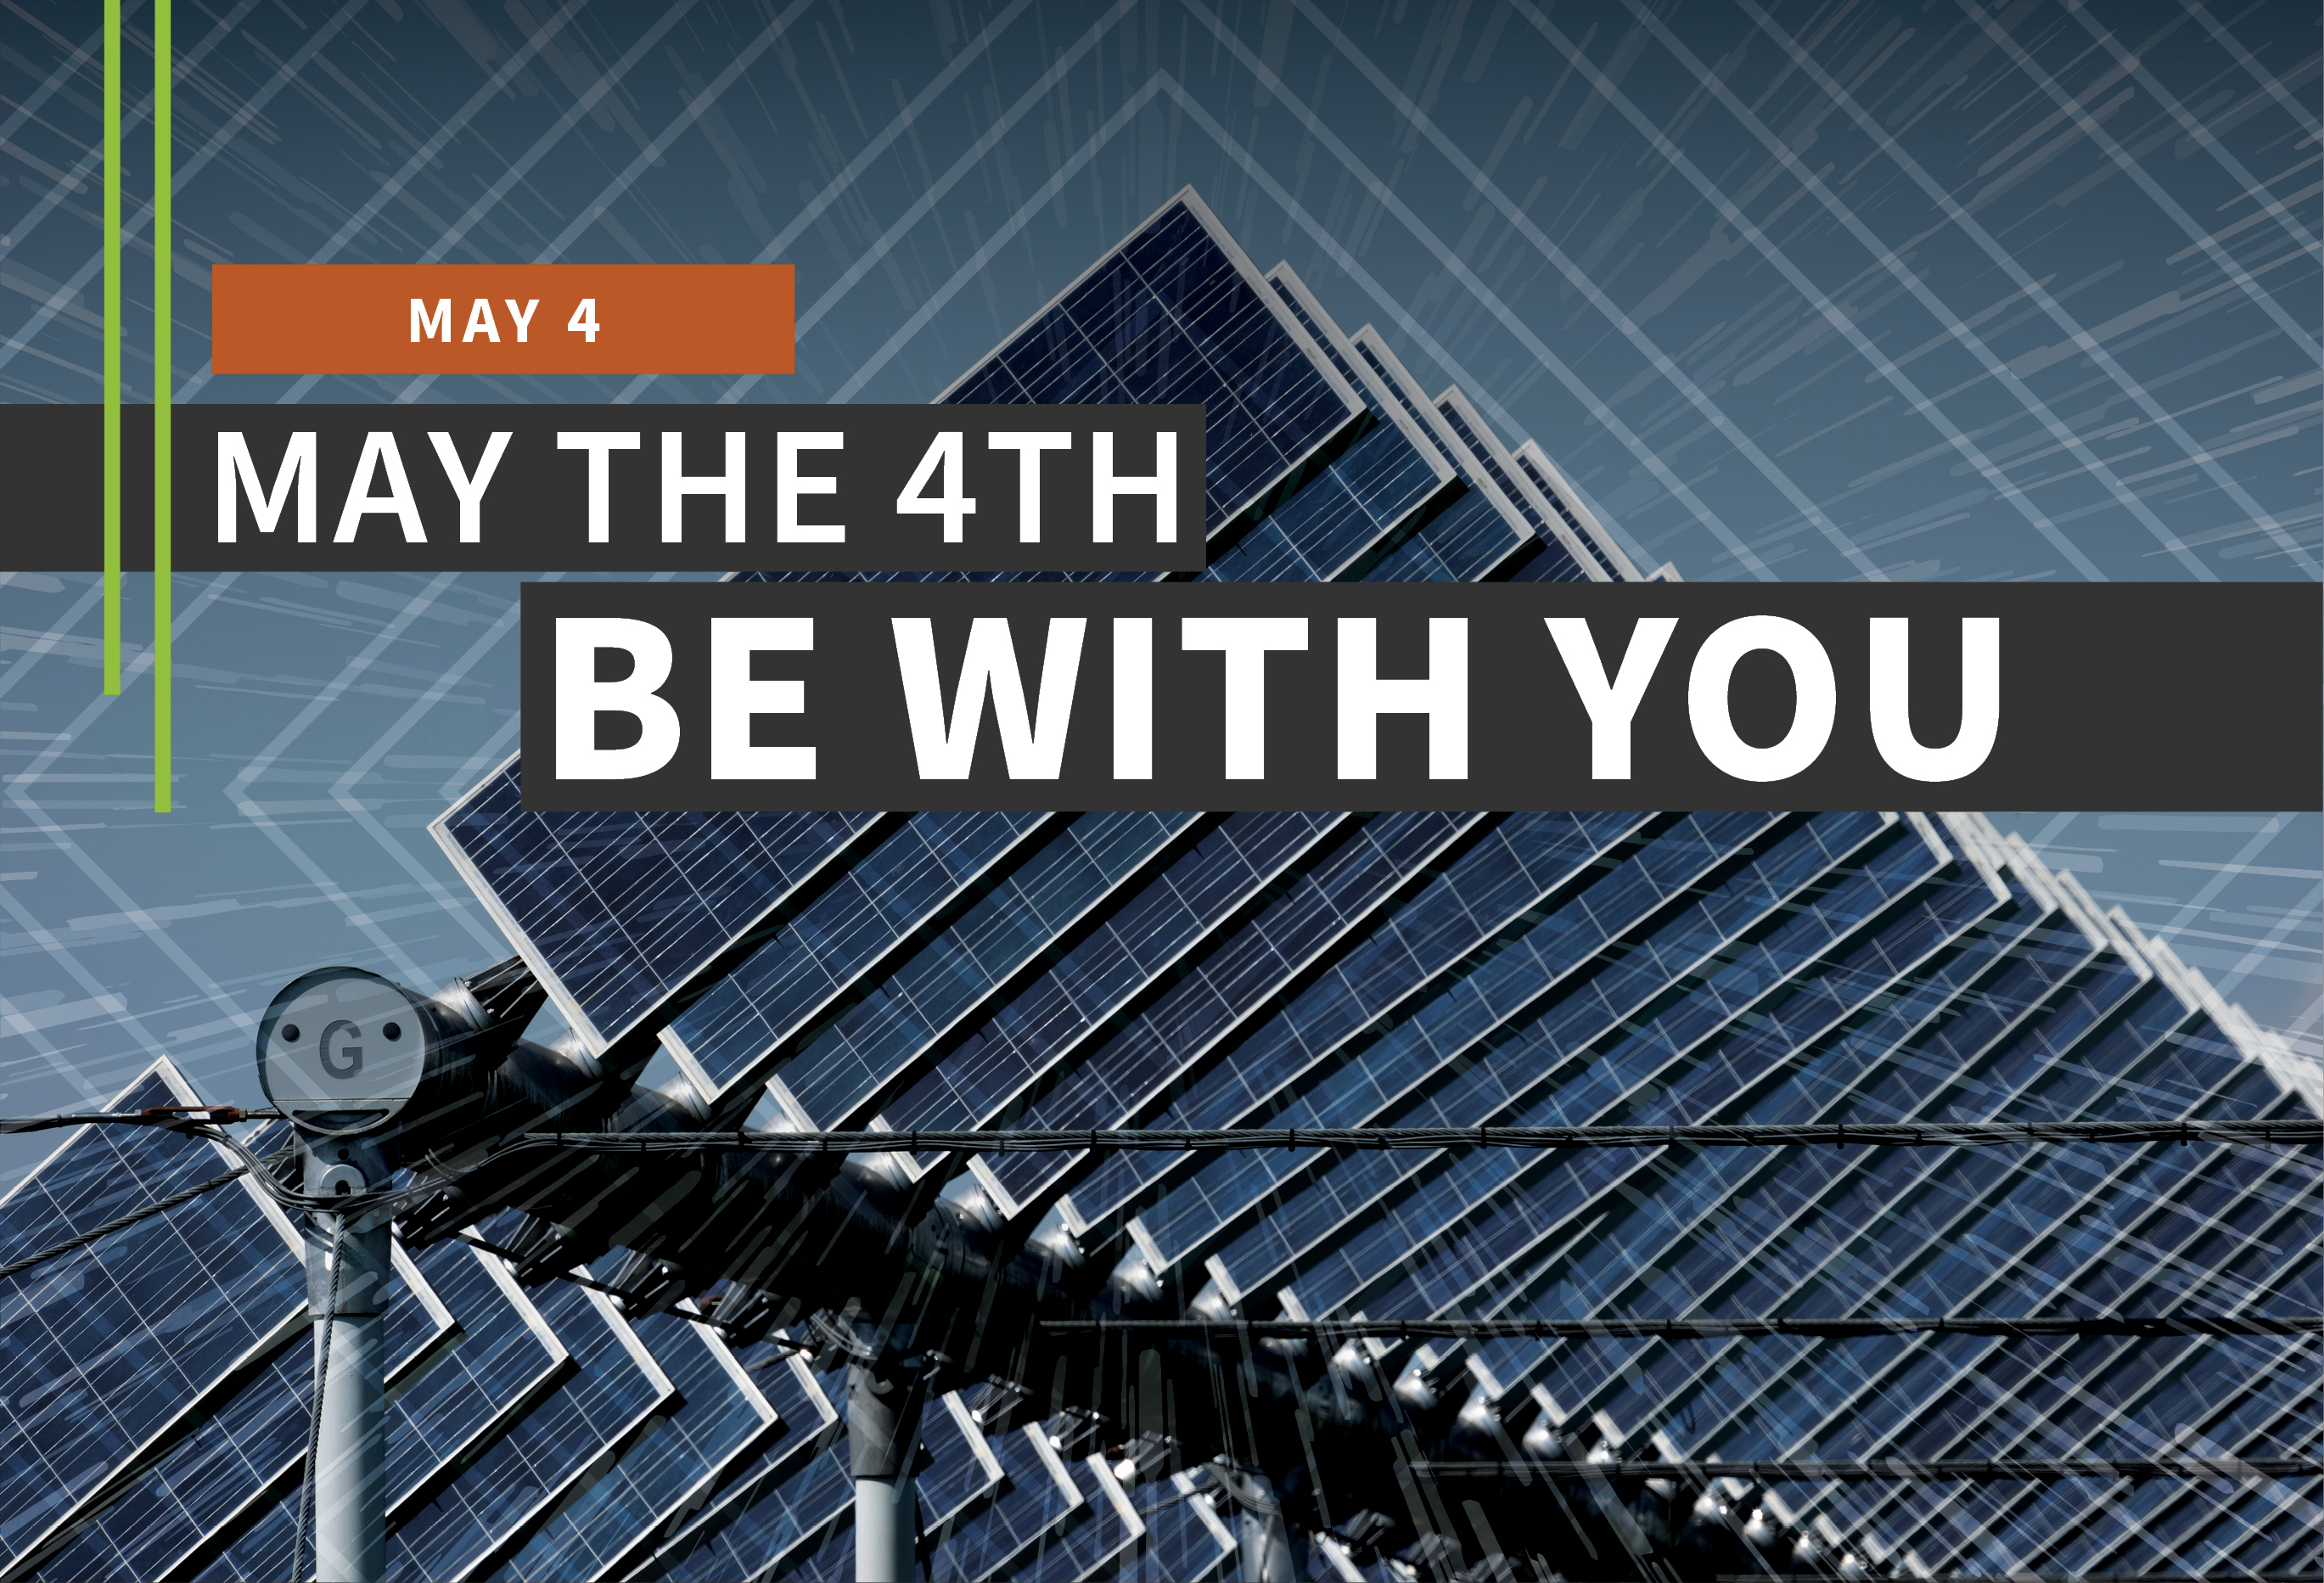 May the 4th Be With You - May 4, 2022